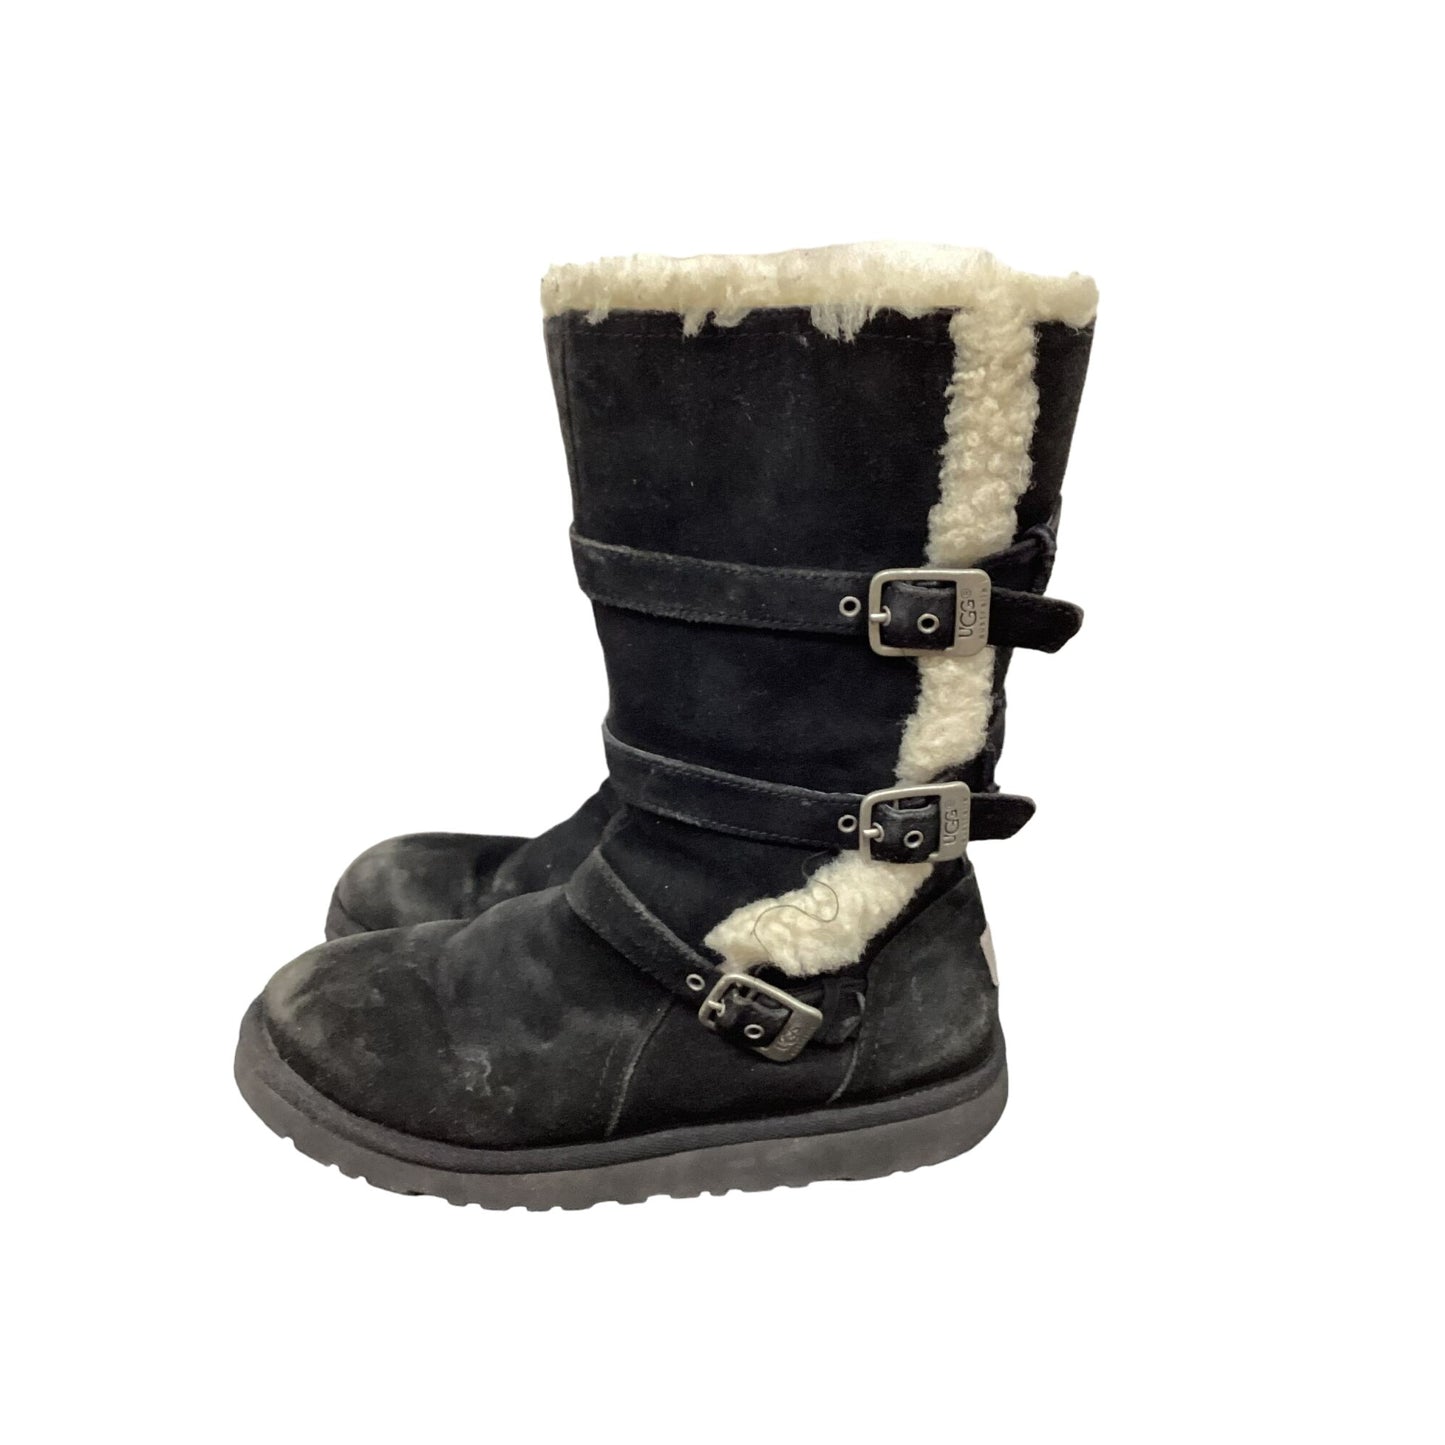 Womens UGG Boots w/ Buckles